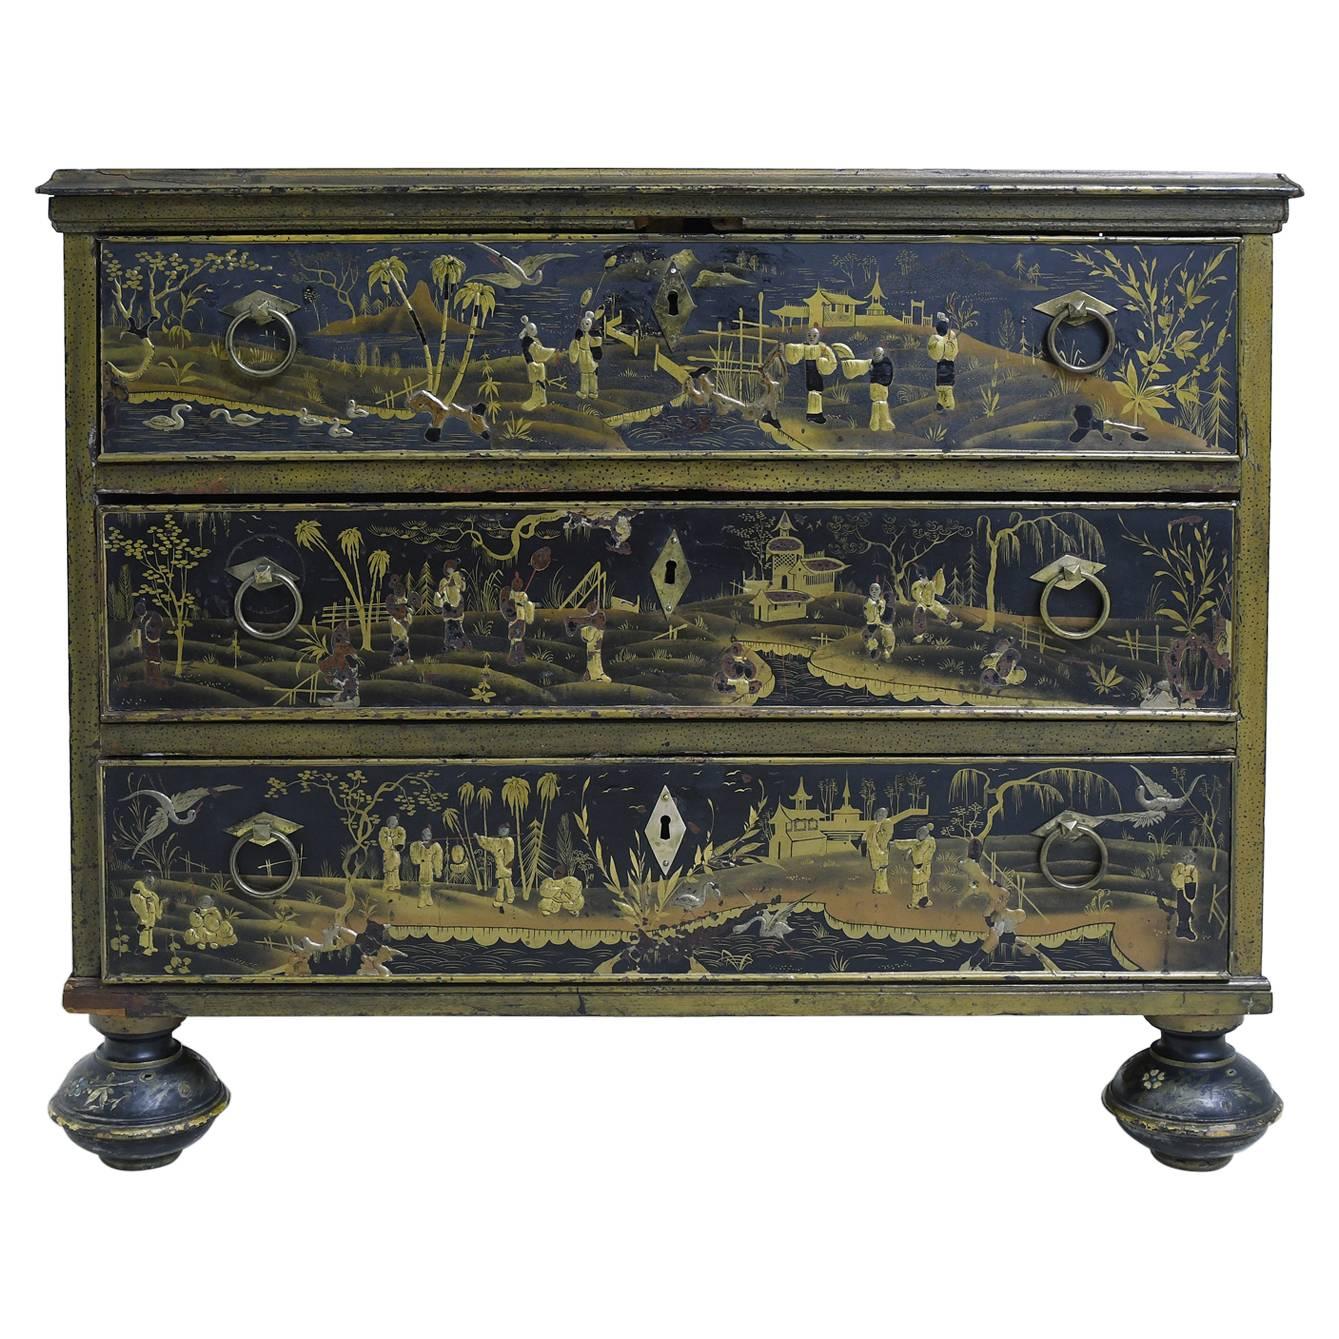 18th Century British Colonial Chinoiserie Chest of Drawers